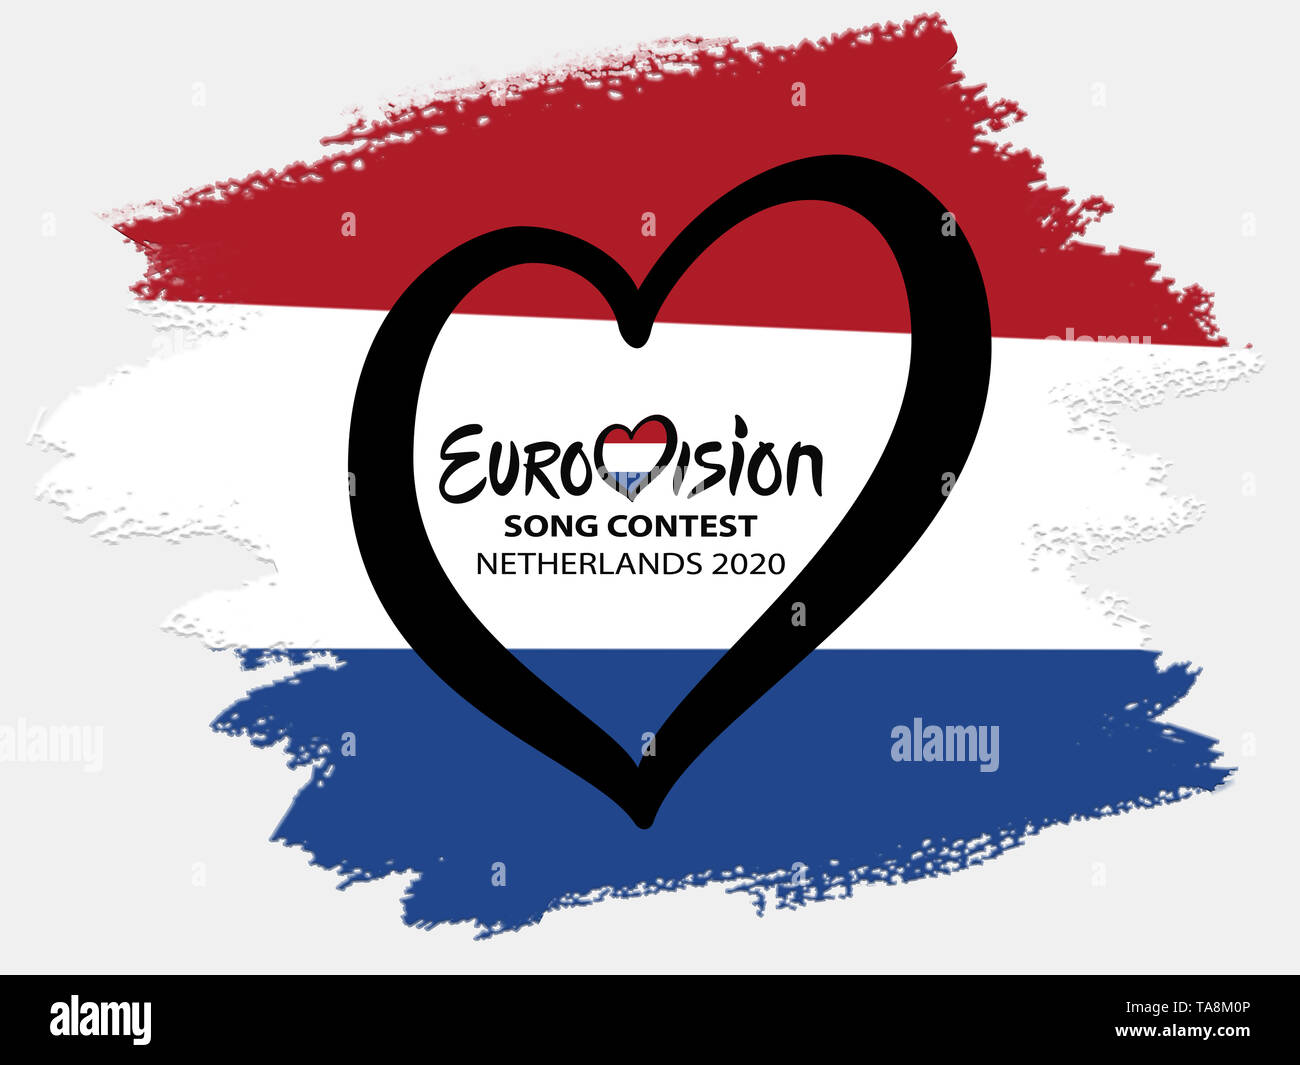 Eurovision Song Contest 2020. The Netherlands. Text Netherlands 2020 Eurovision Heart on flag background Stock Photo